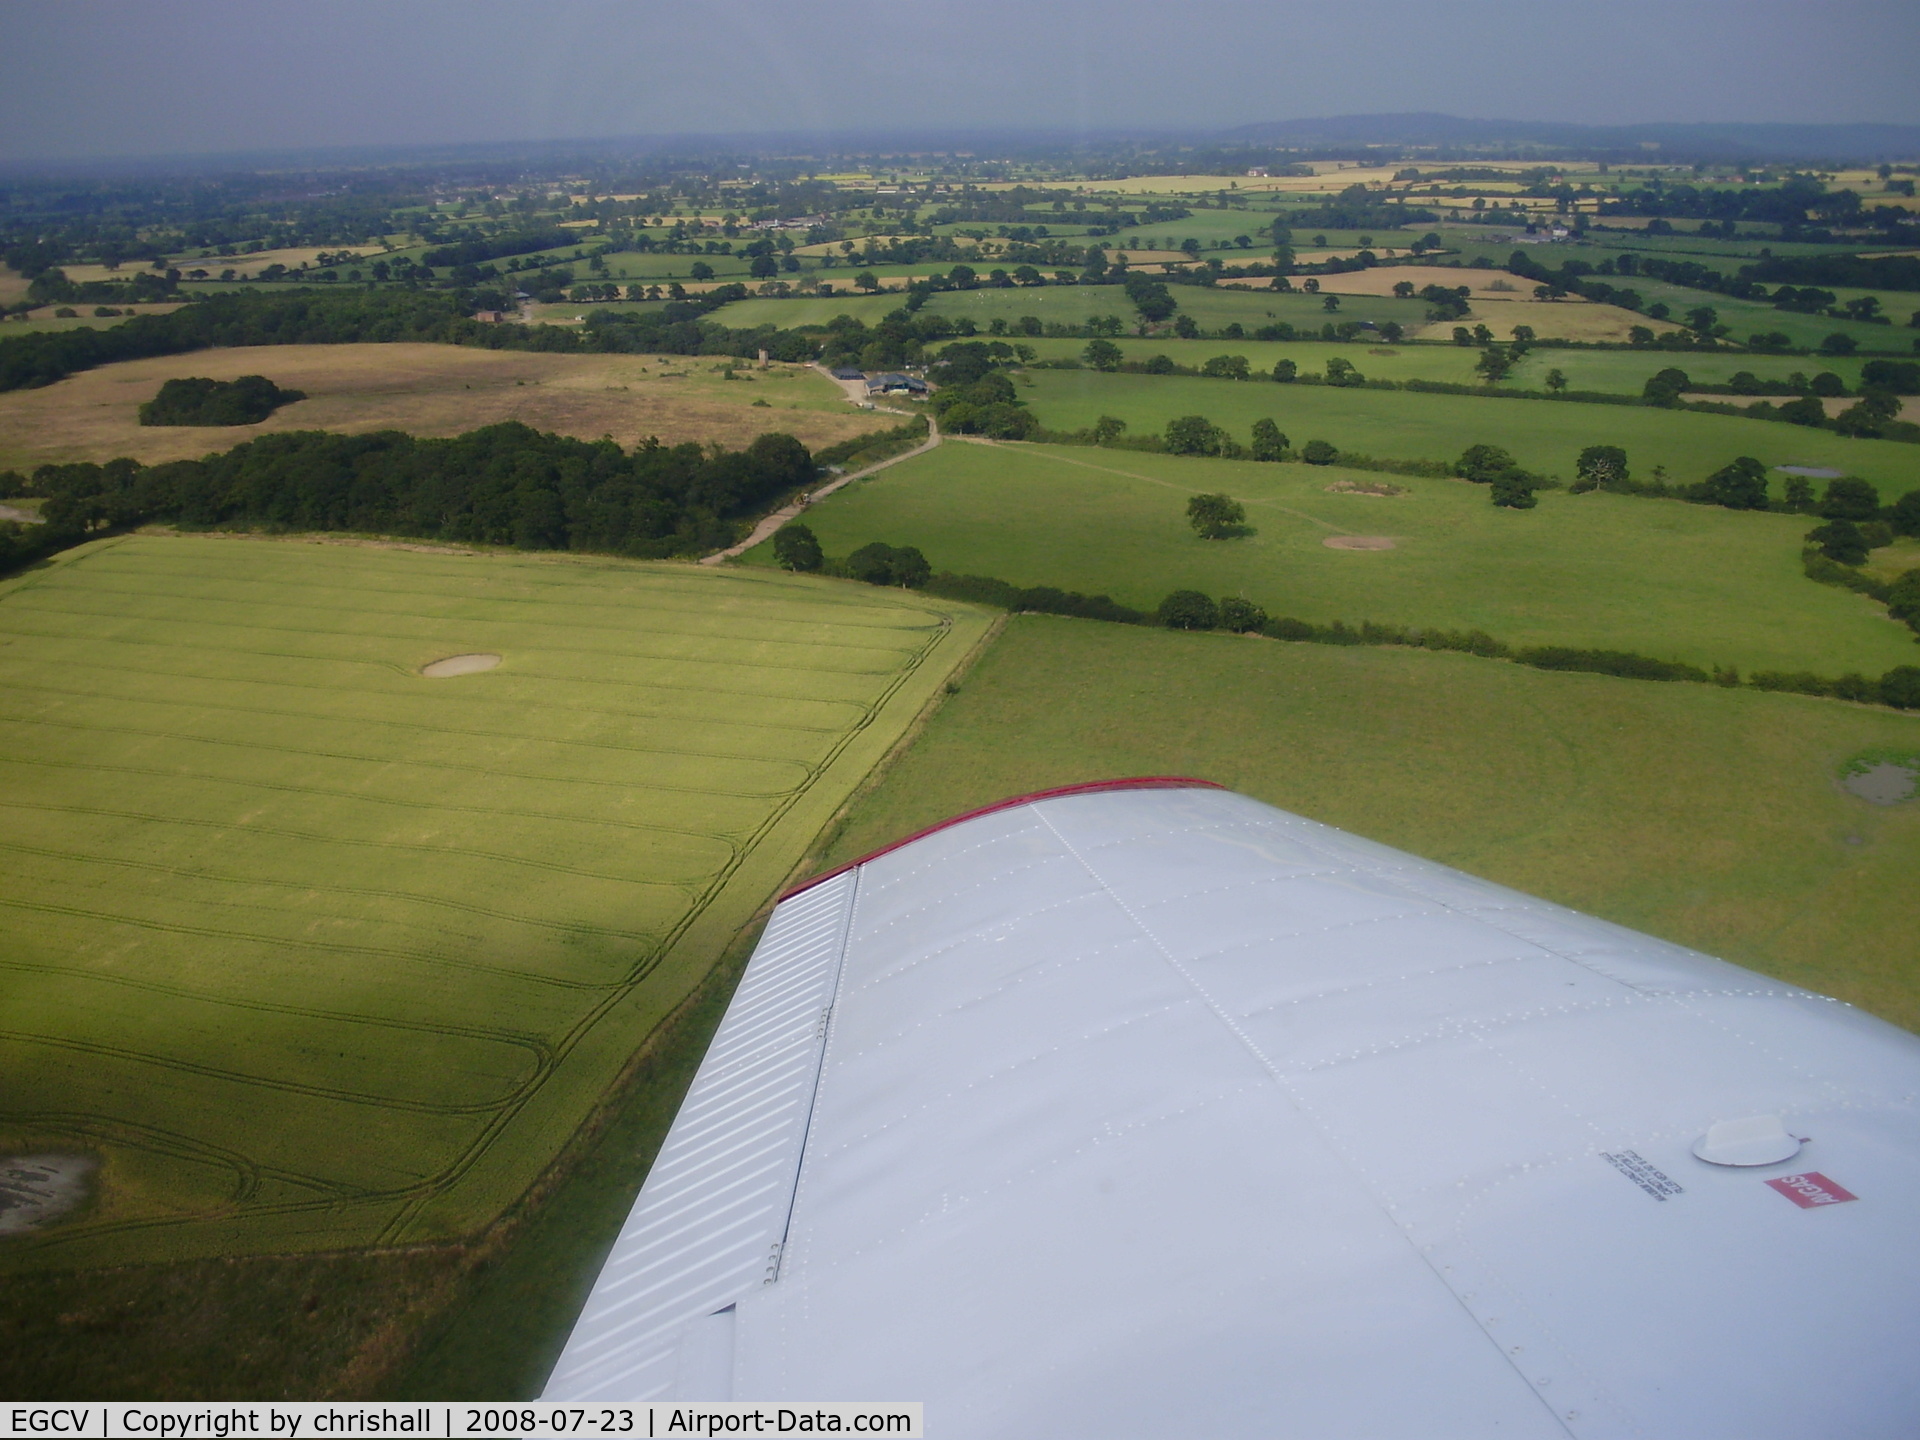 Sleap Airfield Airport, Shrewsbury, England United Kingdom (EGCV) - banking left just after take-off